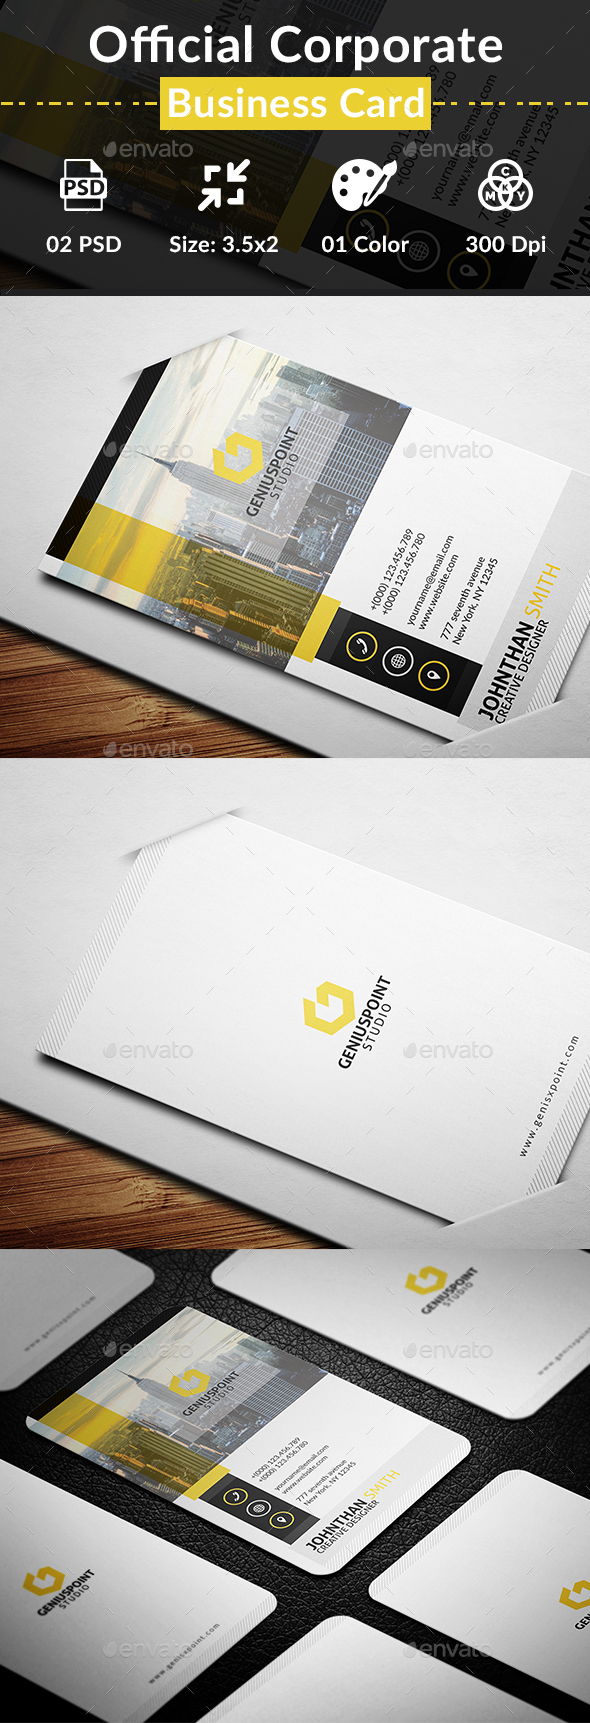 GraphicRiver Official Corporate Business Card 20463221